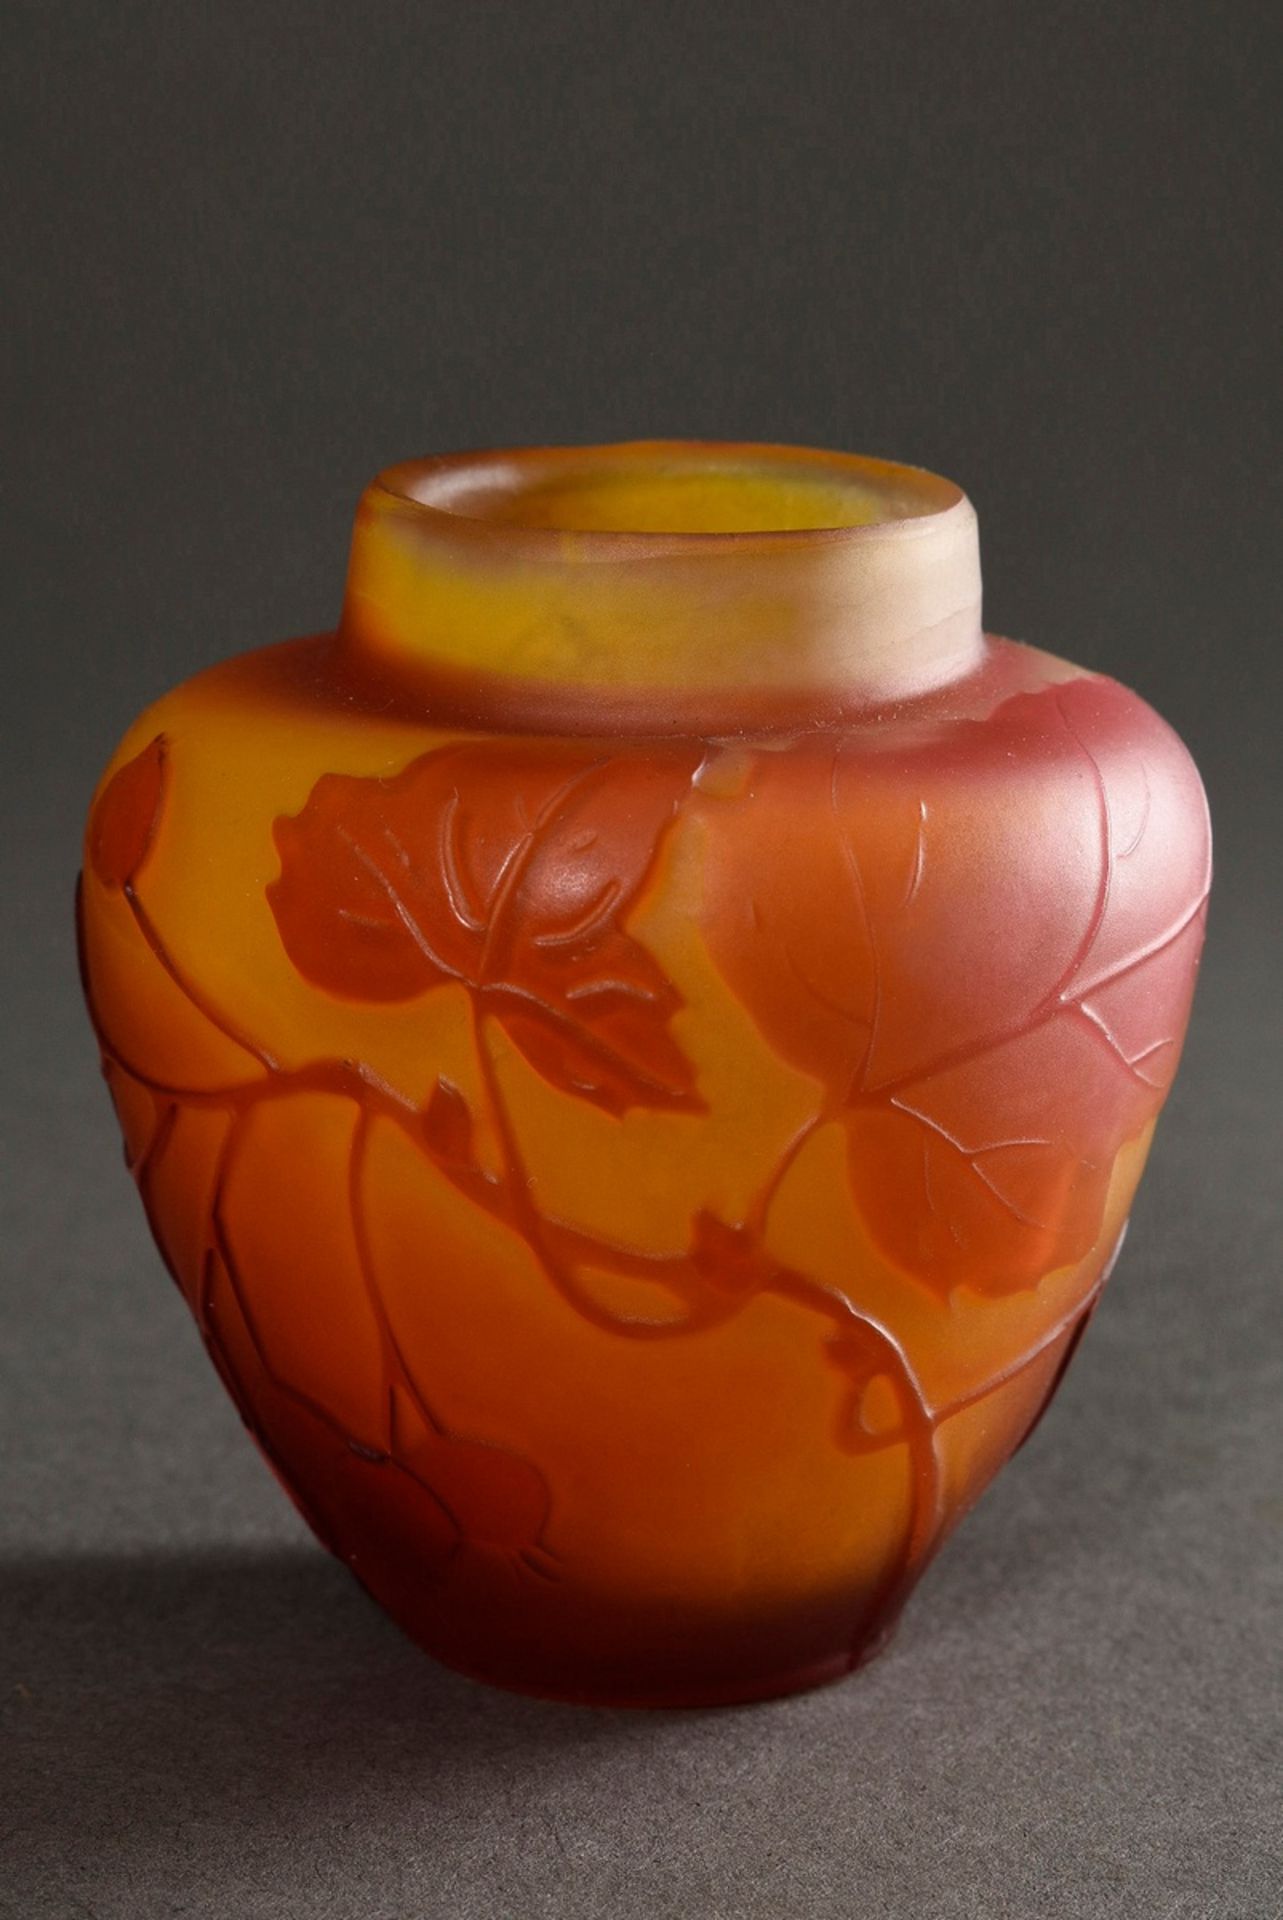 Small Gallé vase "rowan berries" in orange-red flashed glass, cut and polished, sign., 1908-1920, h